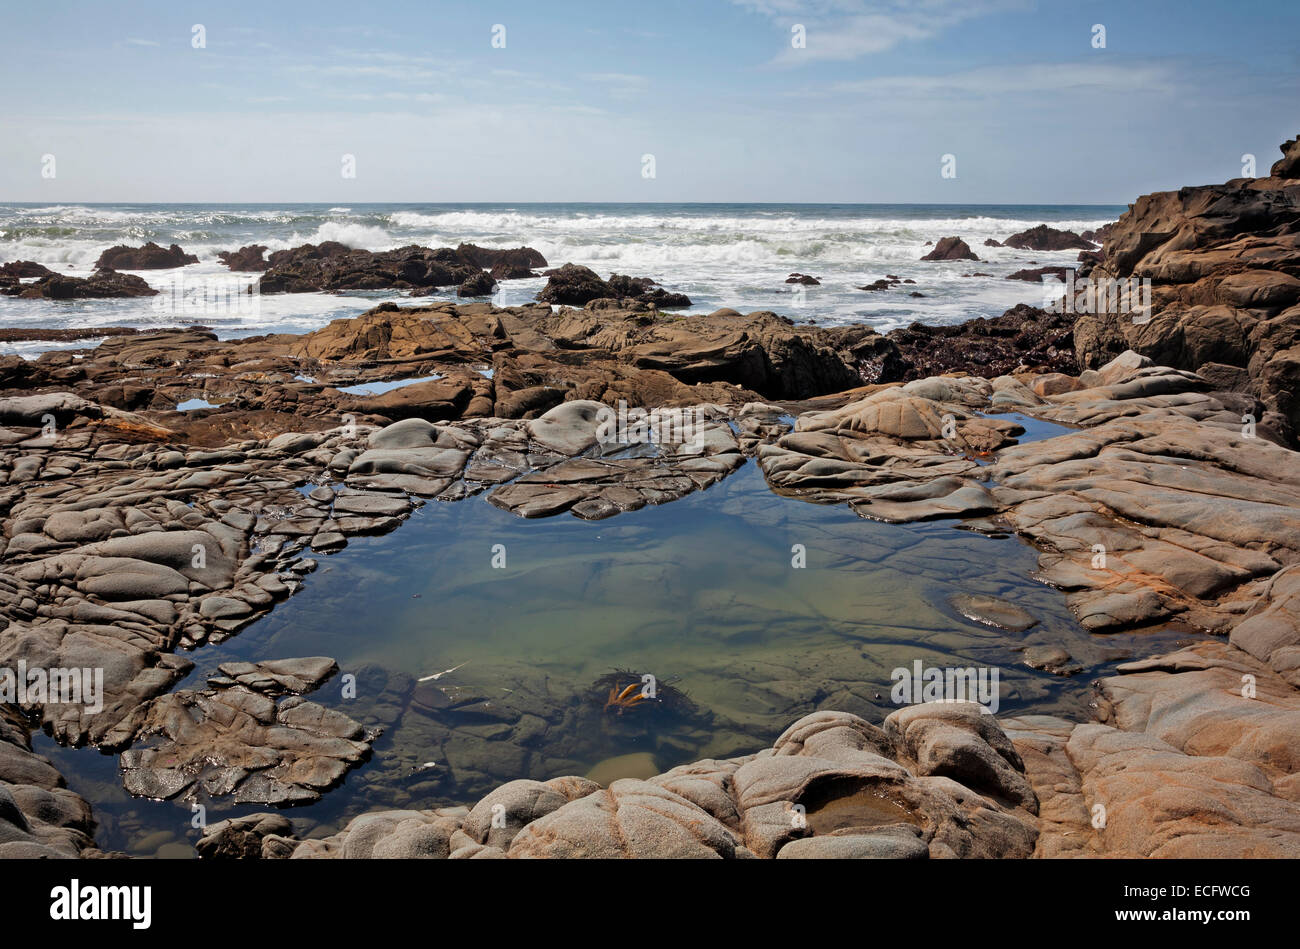 CA02495-00...CALIFORNIA - Colorful eroded sandstone and small pool at Pescadero State Beach. Stock Photo